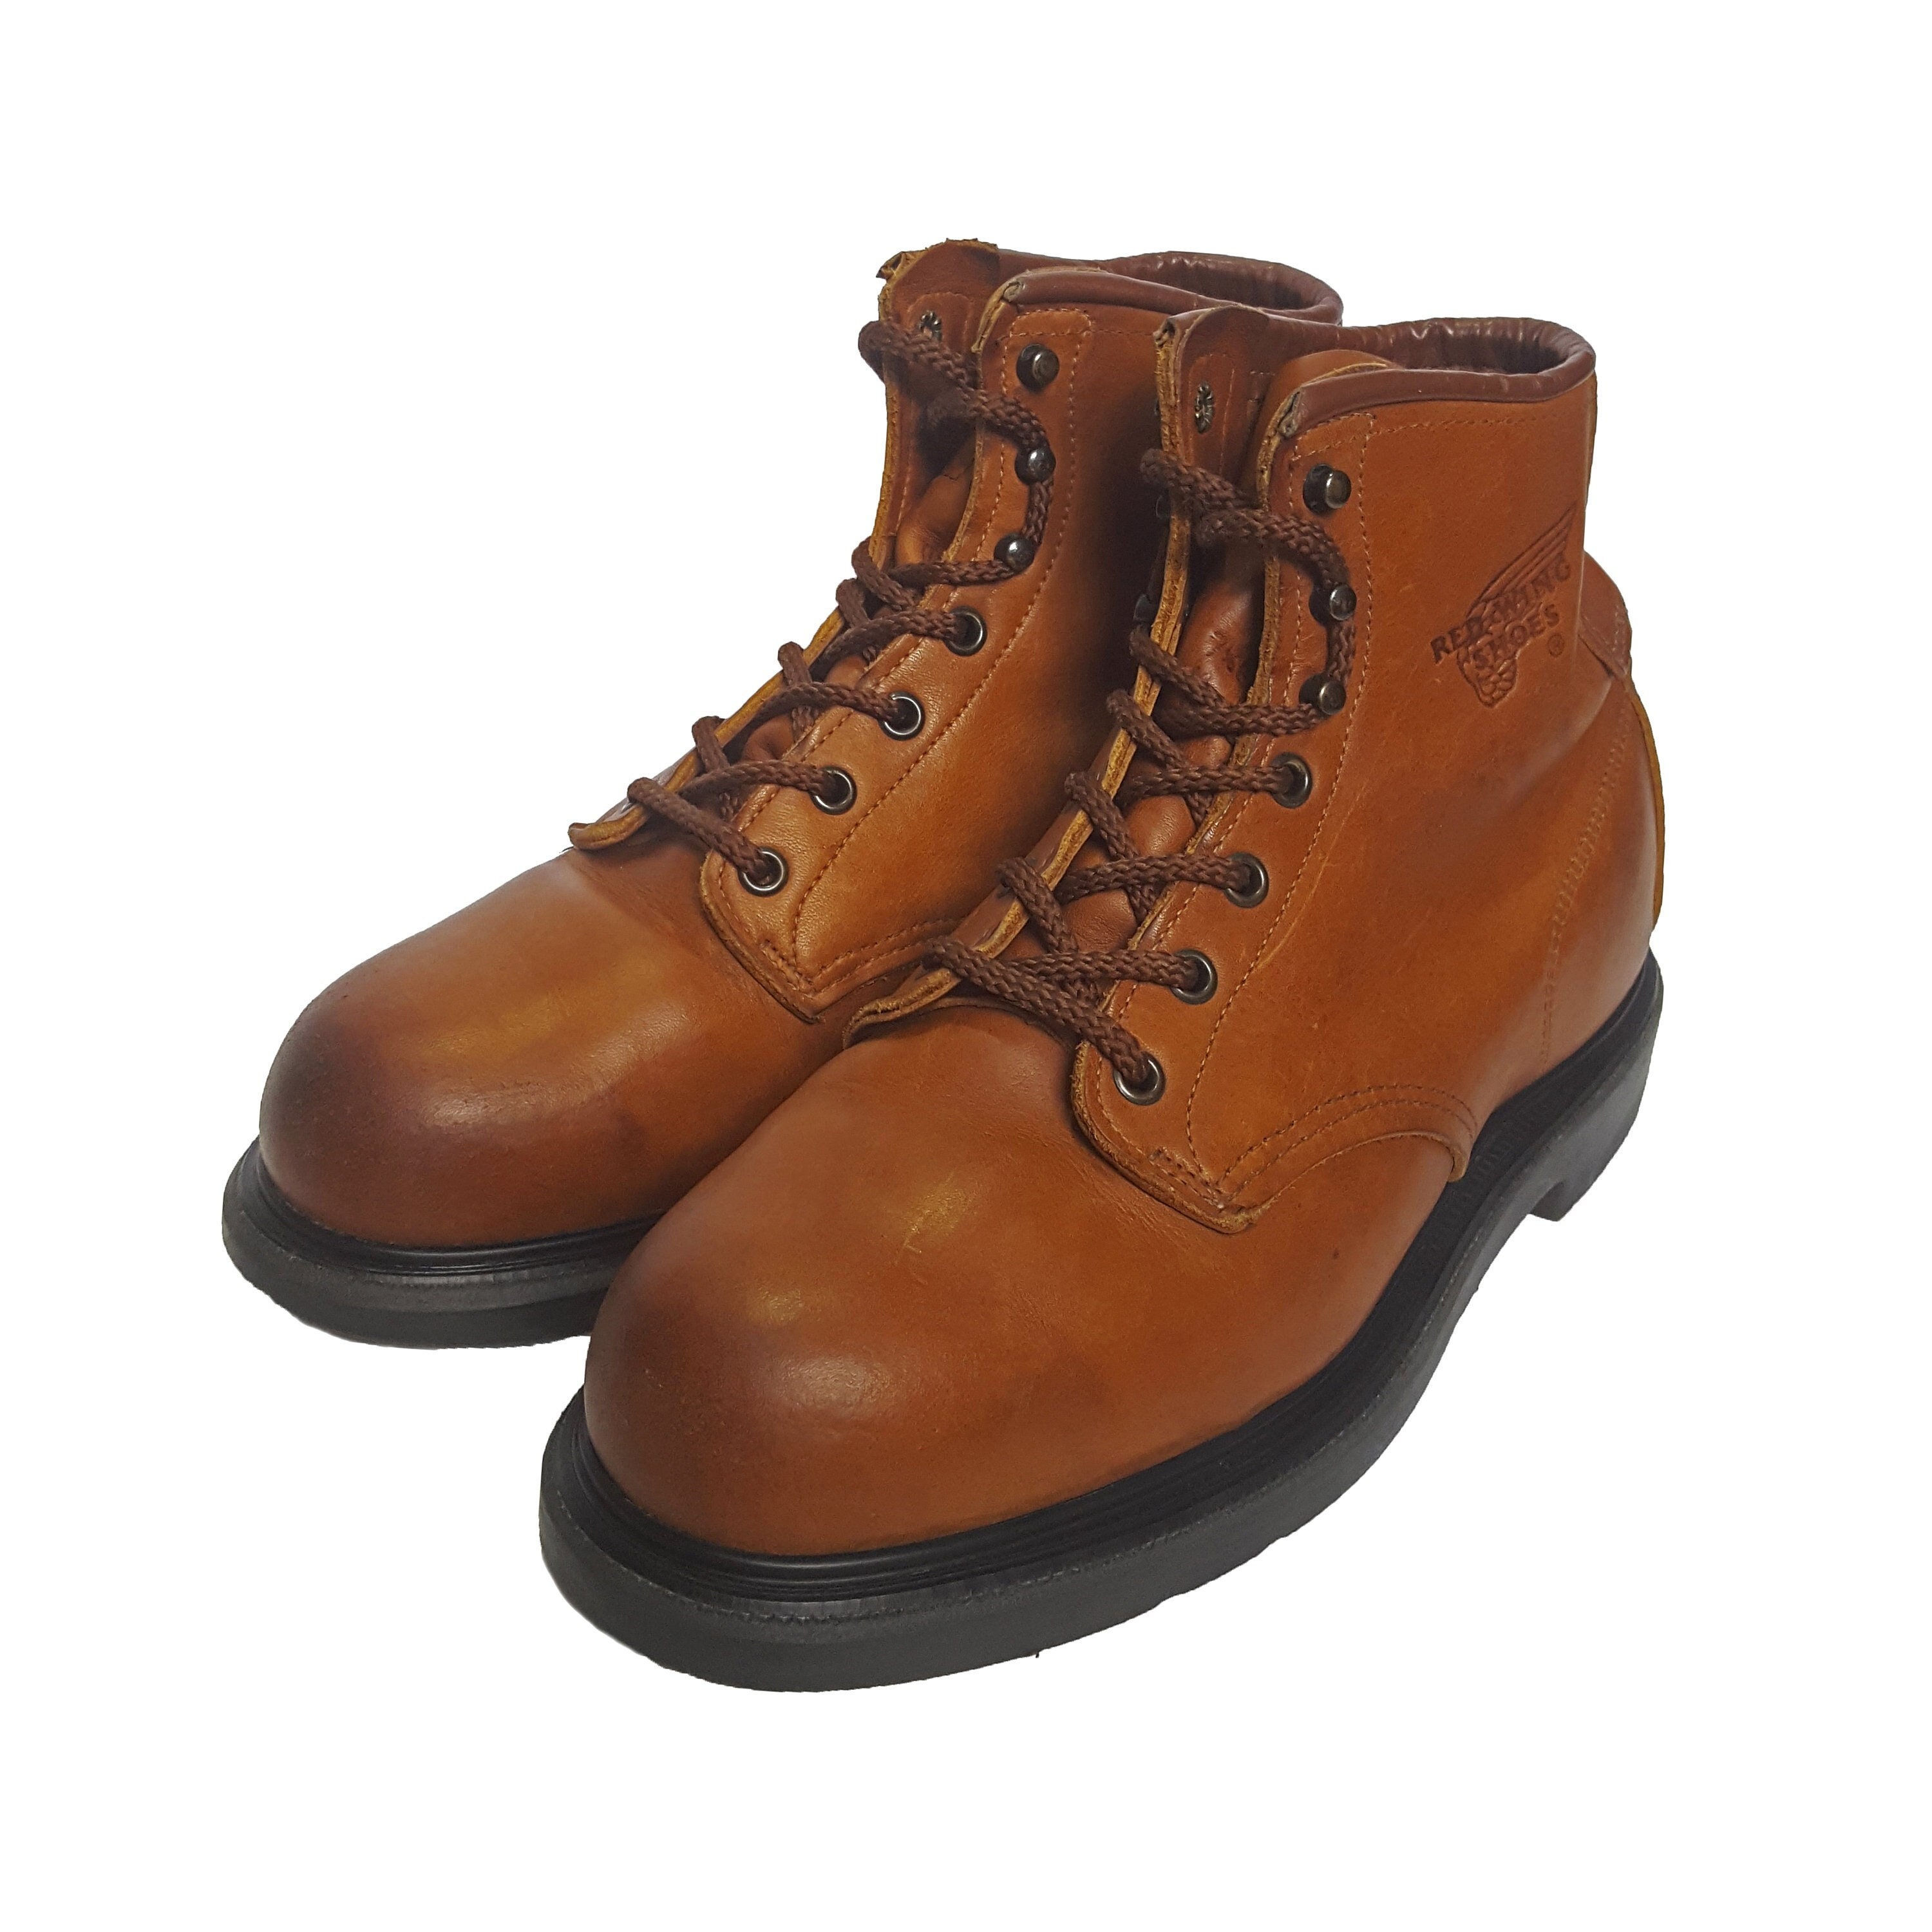 RED WING USA Super Sole 2245 Mens ankle Work Boots MANY Sizes IN ORG BOX